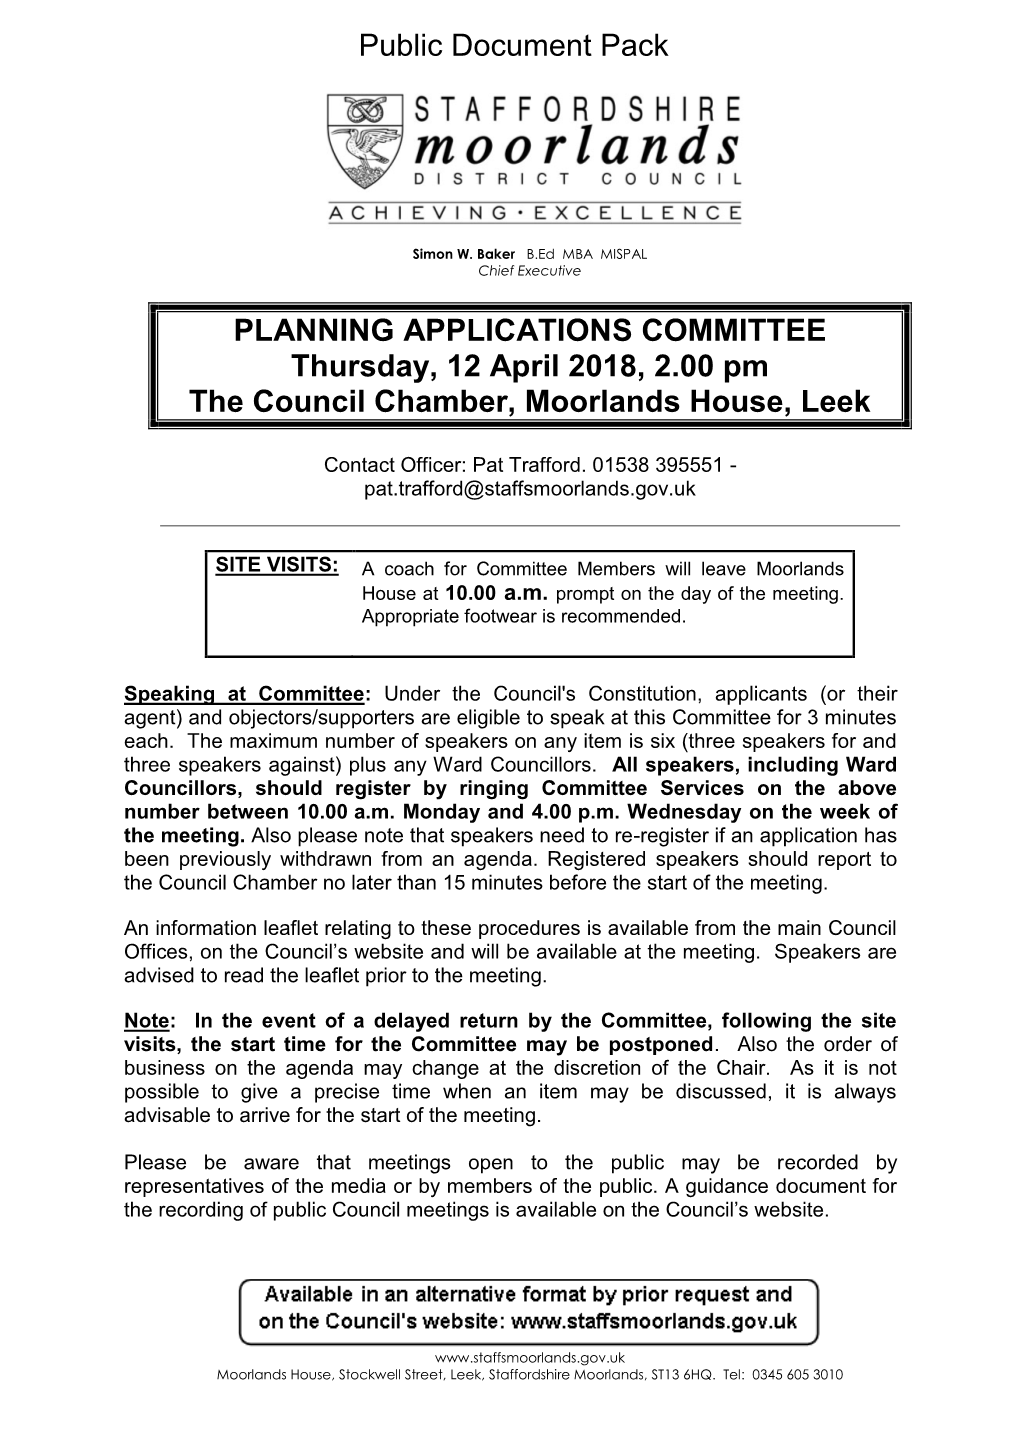 (Public Pack)Agenda Document for Planning Applications Committee